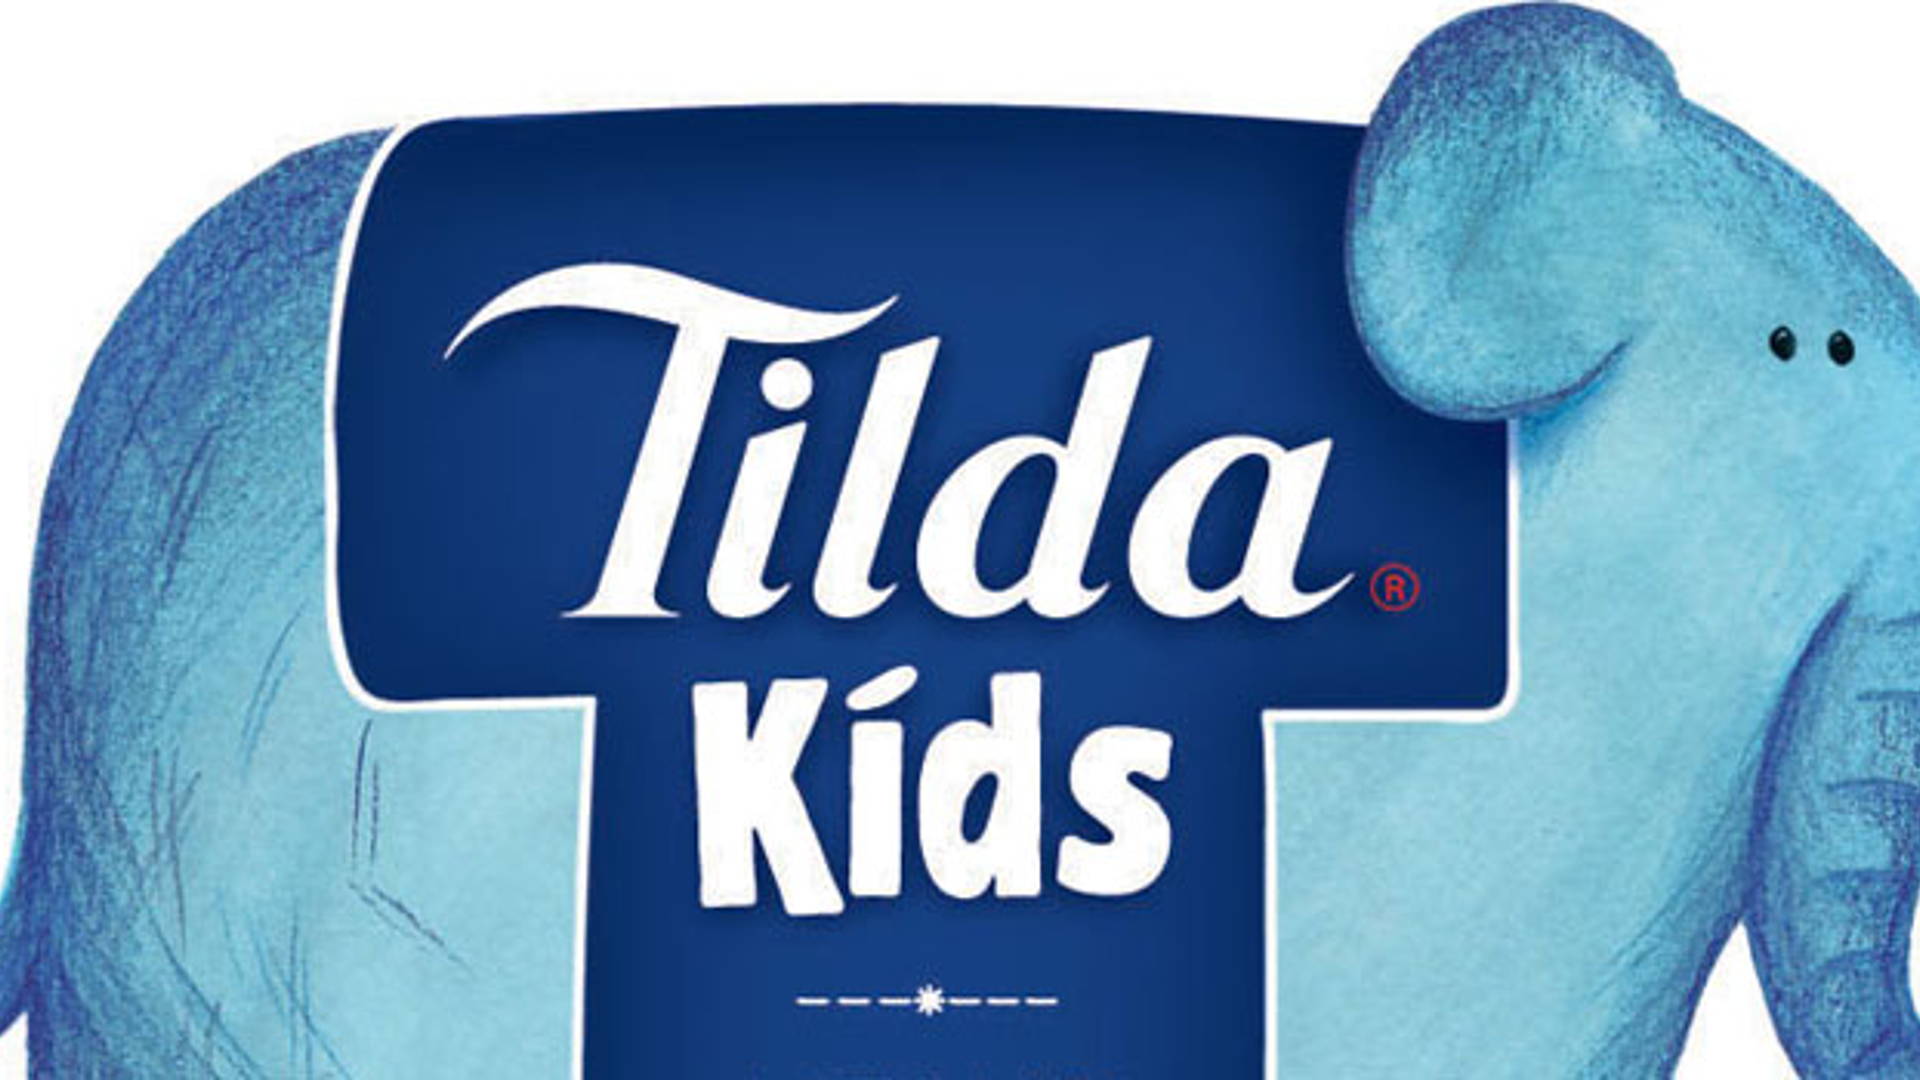 Featured image for Tilda Rice for Kids